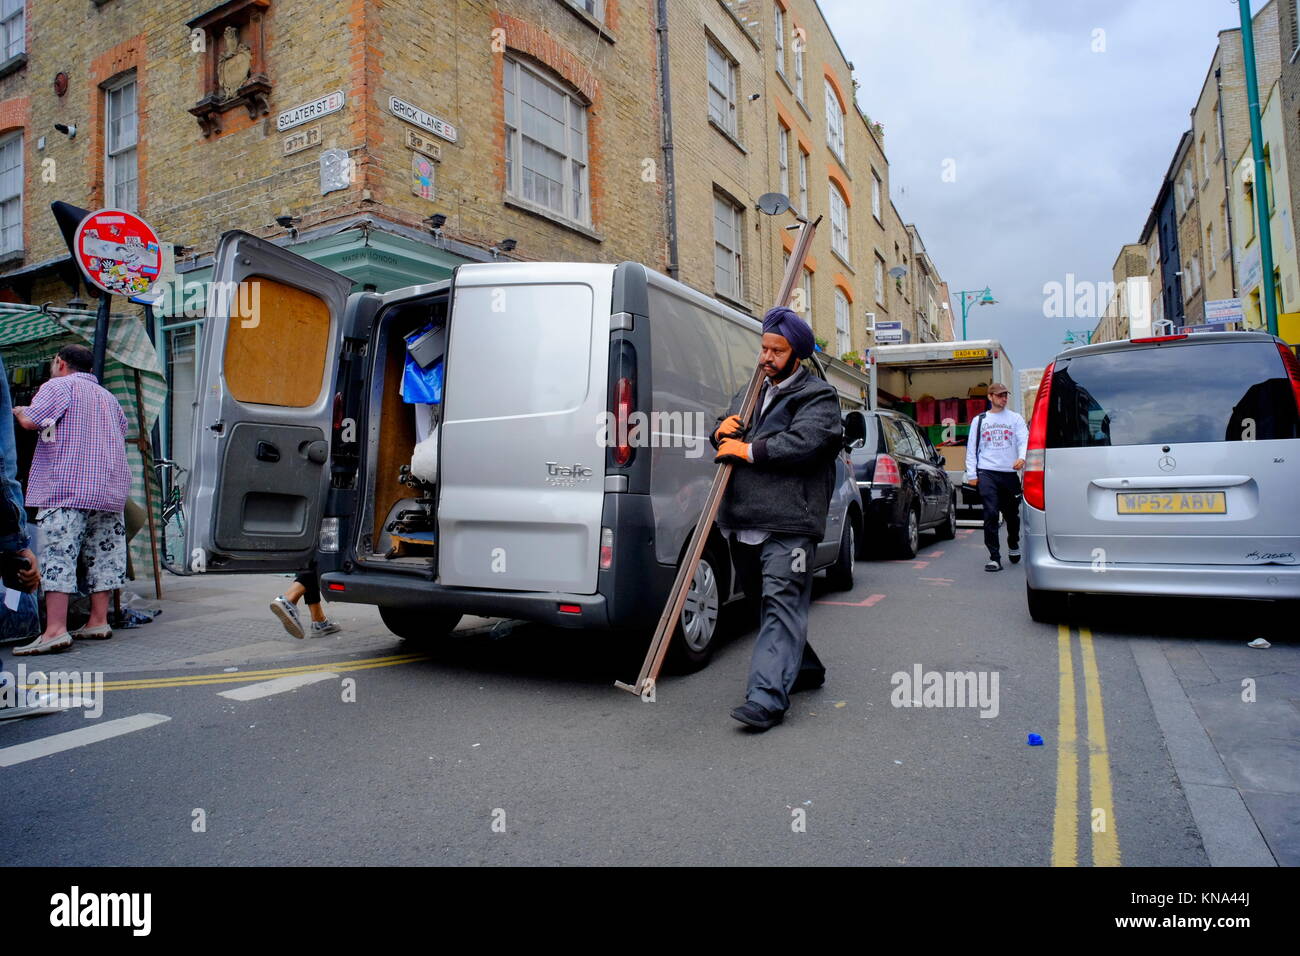 Sikh man carrying metal poles to a silver van in Shoreditch, London, England, UK Stock Photo